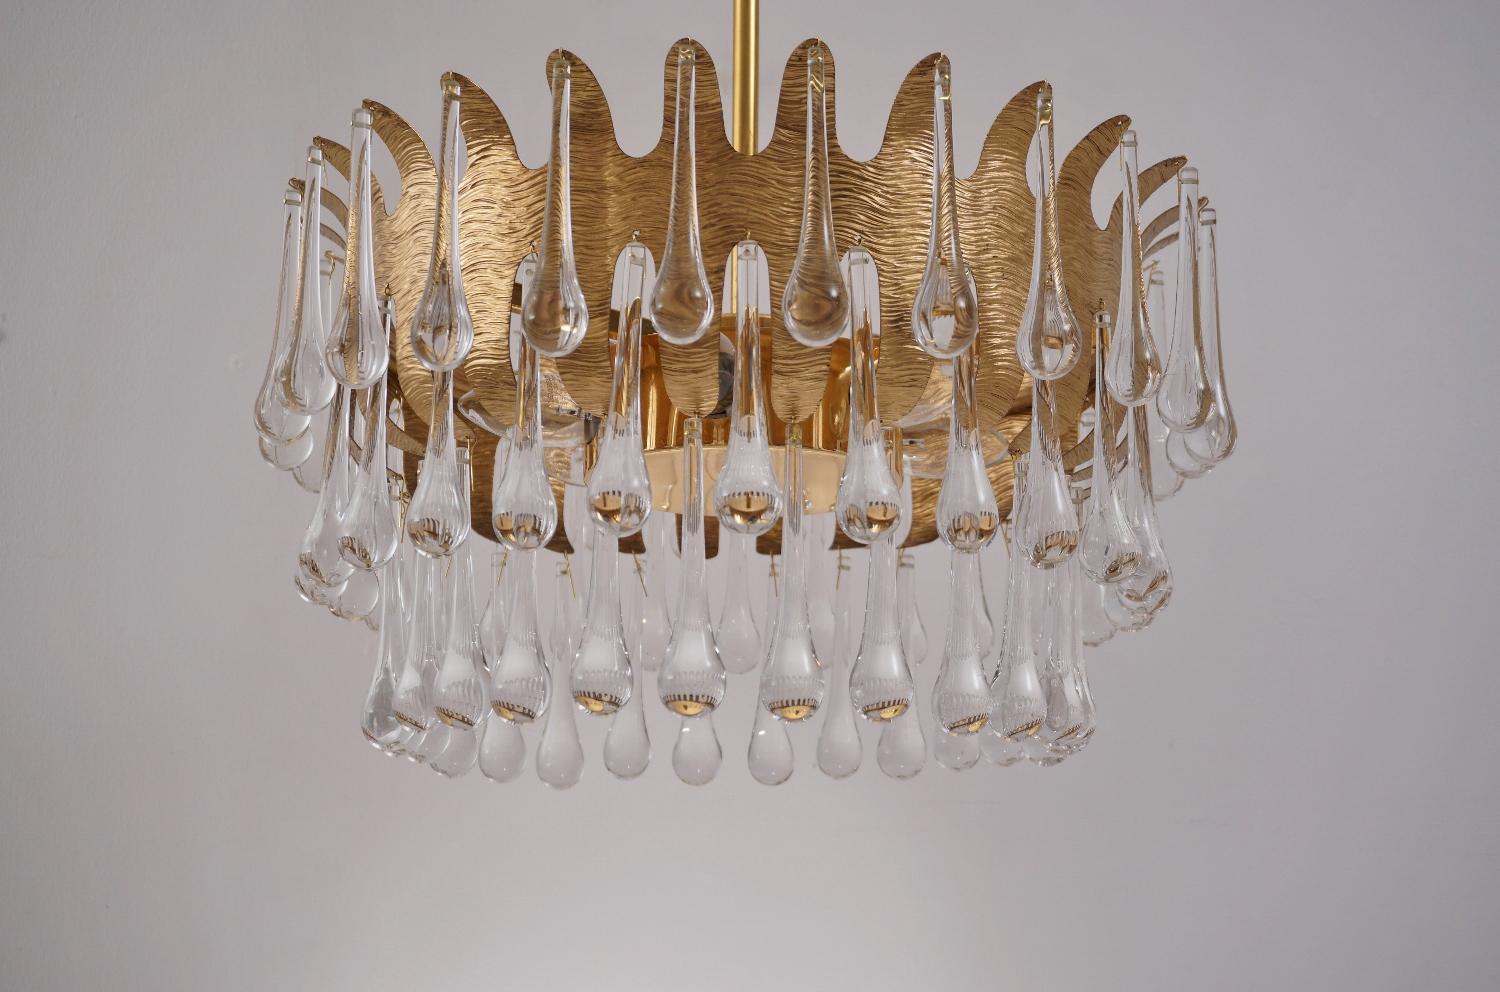 Ernst Palme chandelier for Palwa, gold plated gilt frame with 78 crystals, 1960s, German.

This chandelier has been thoroughly cleaned respecting the vintage patina. Newly rewired and earthed with gold silk cable, in full working order and ready